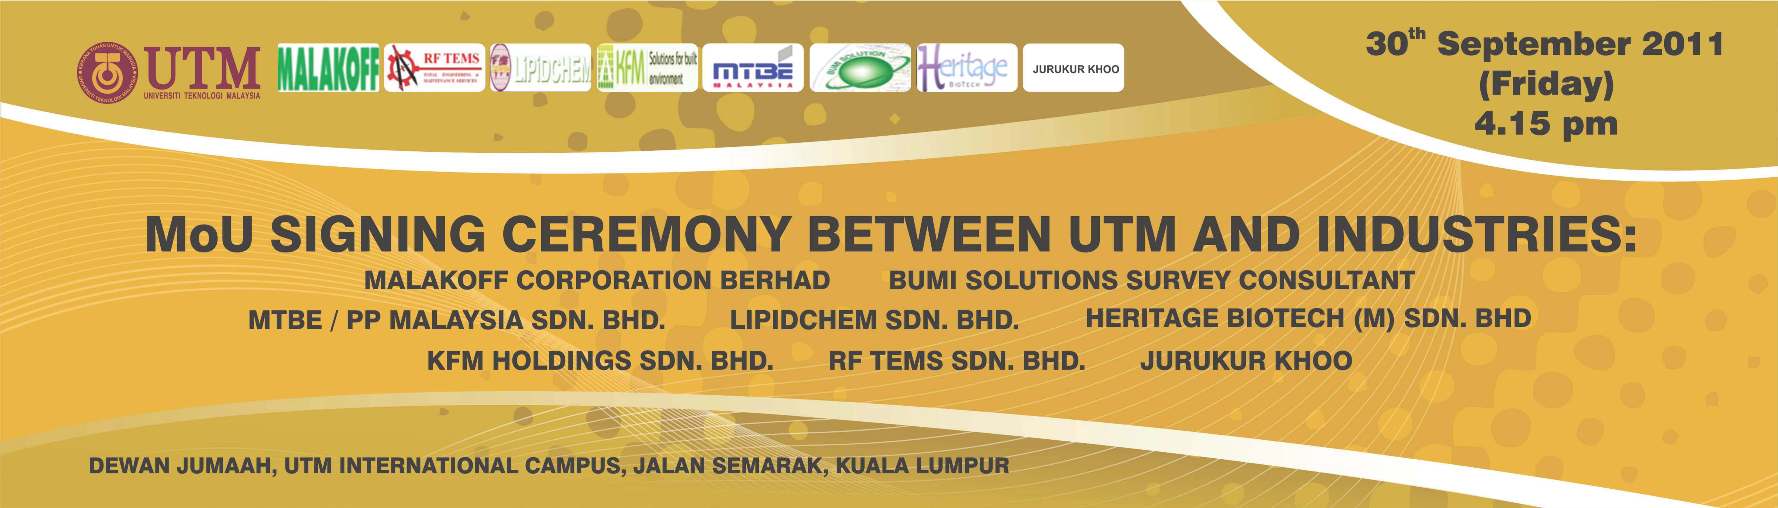 MoU Signing Ceremony between UTM and Industries